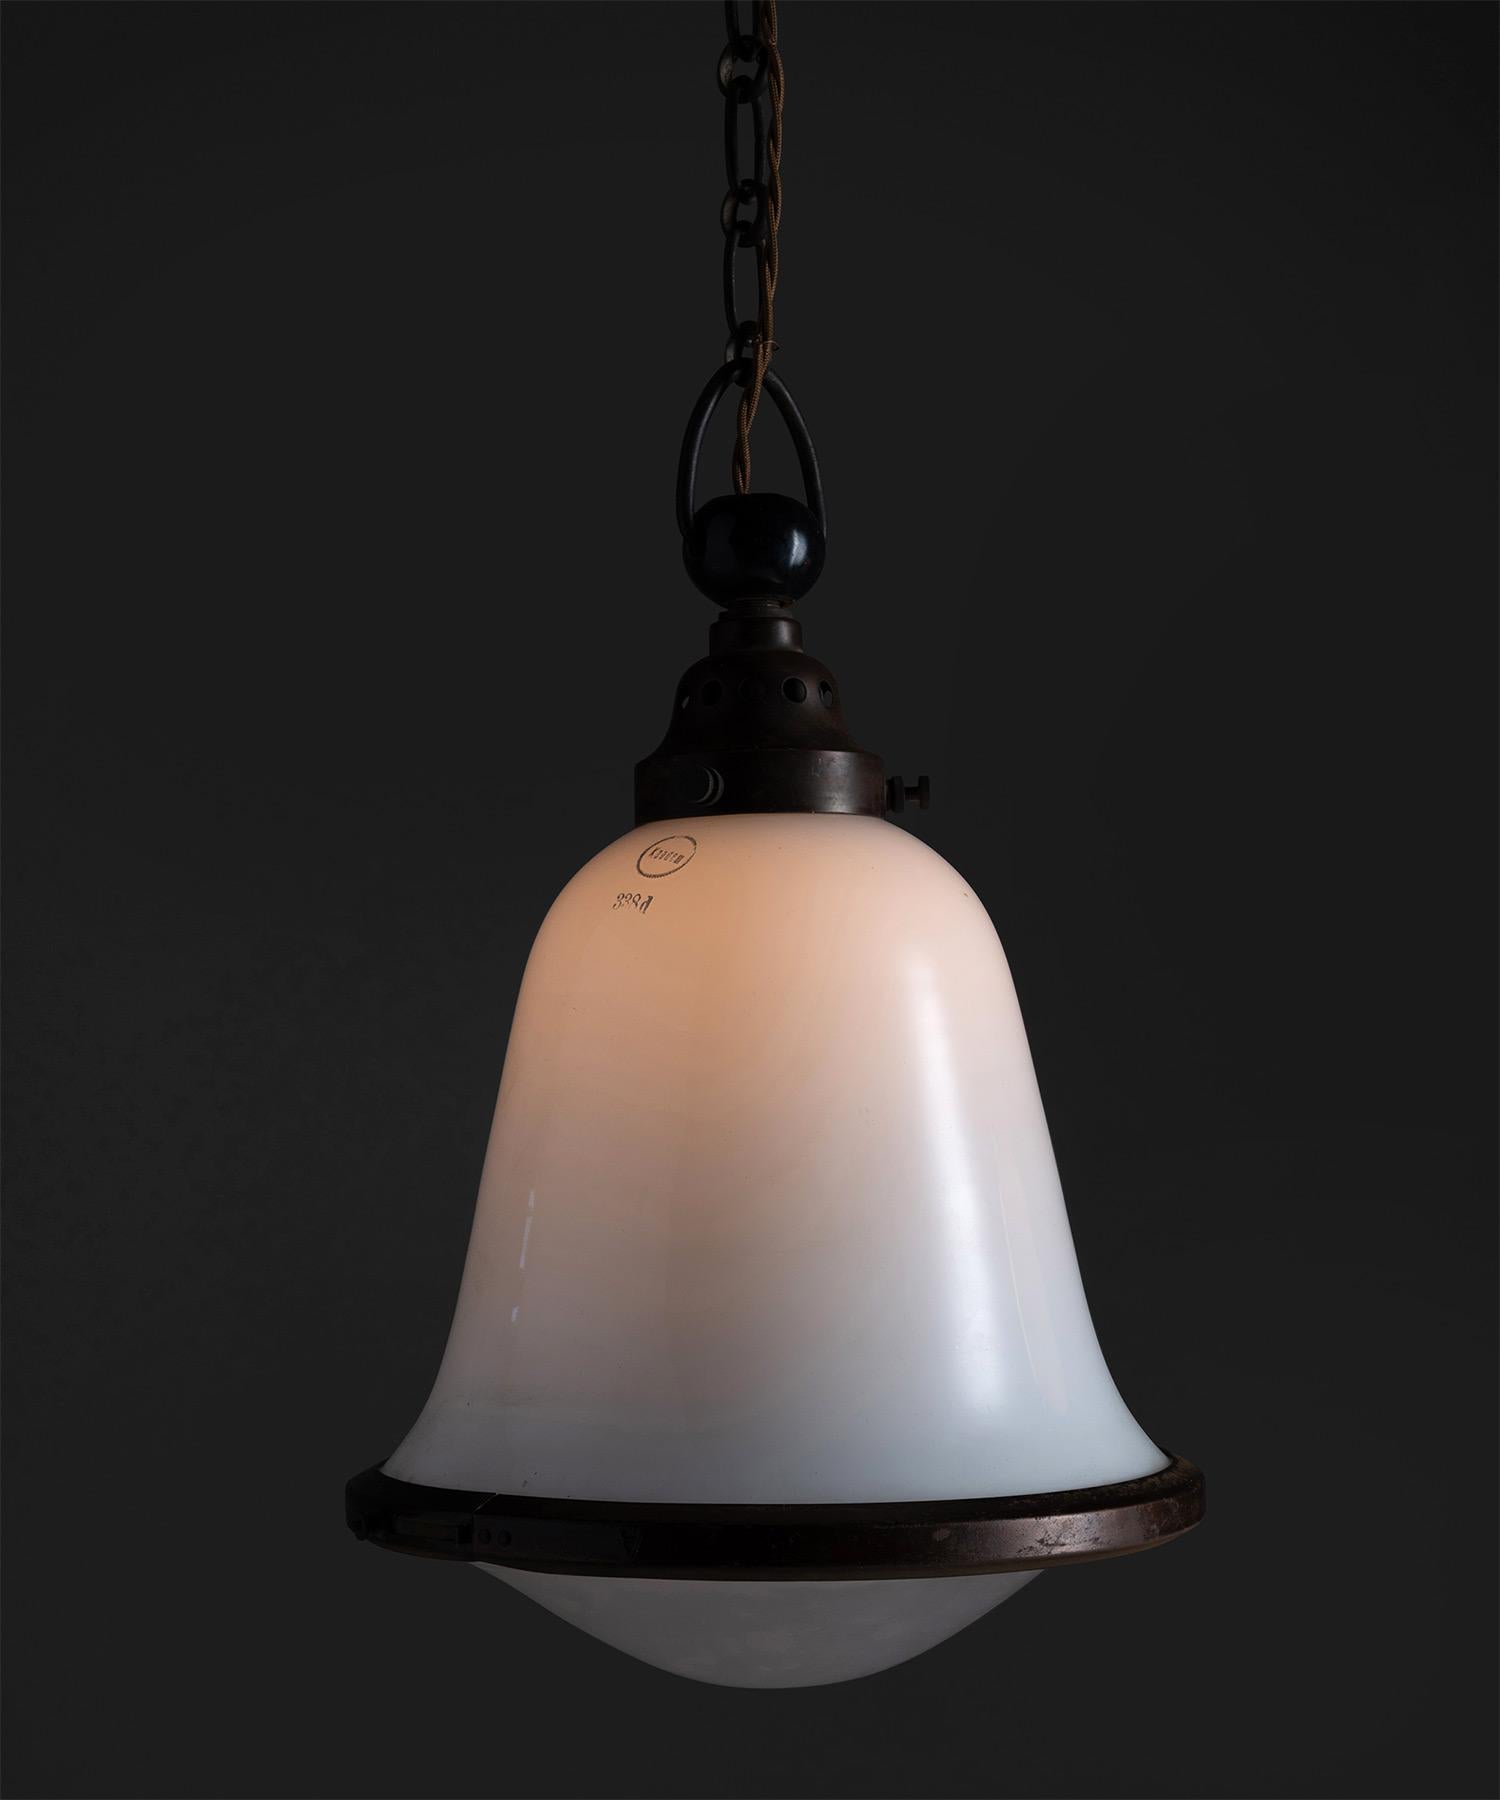 20th Century Opaline & Frosted Glass Pendant by Kandem, Germany circa 1930